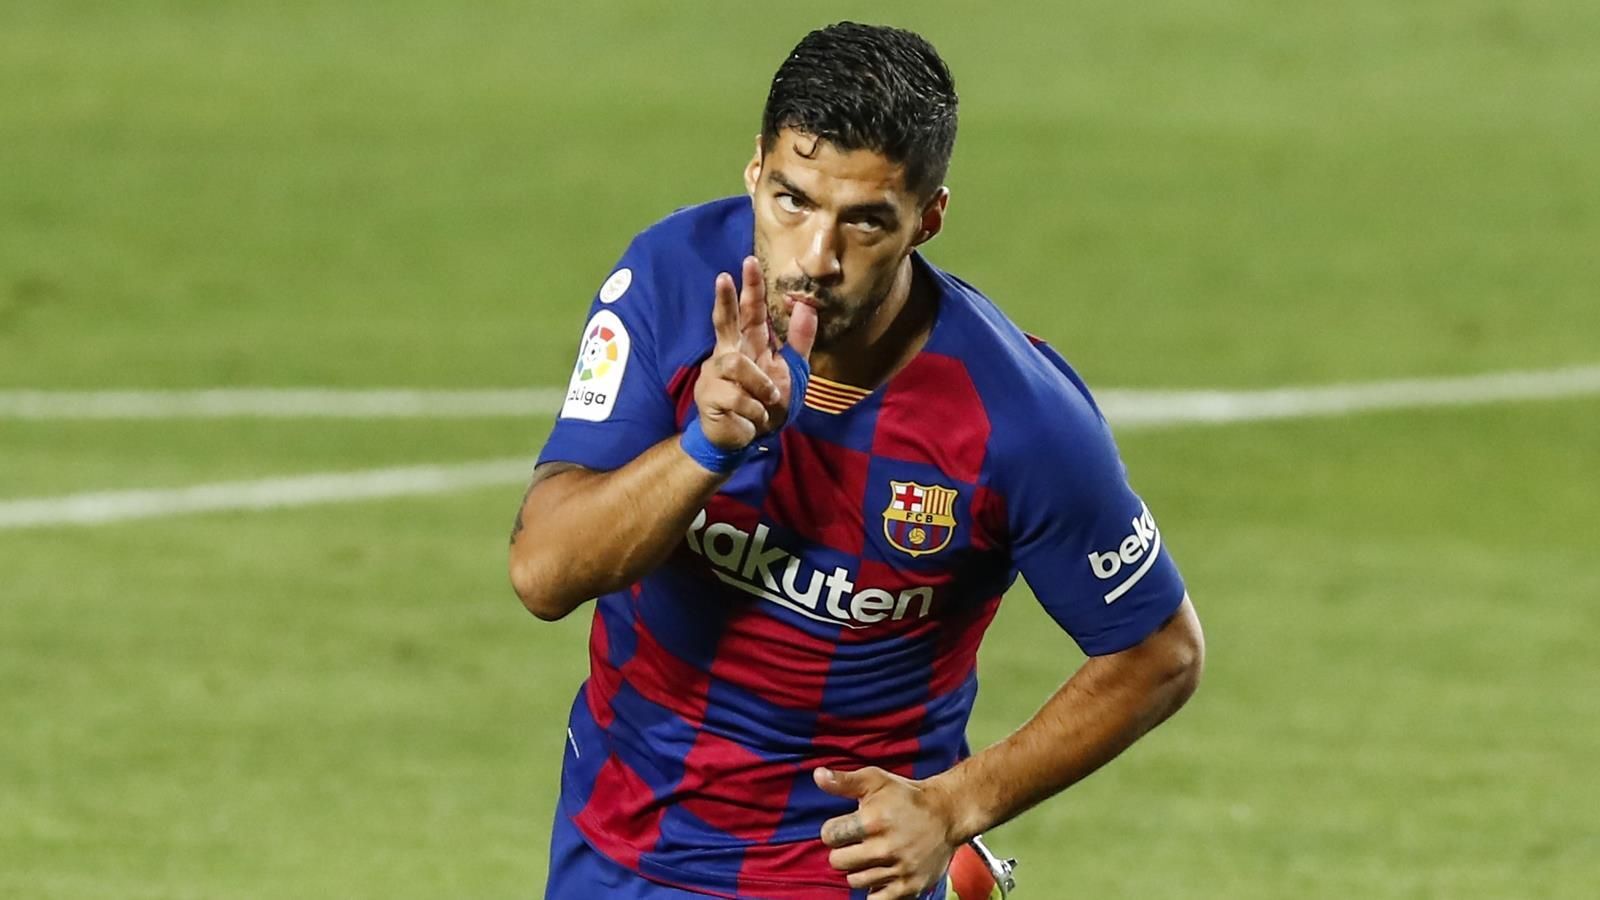 Barcelona Indebted to Luiz Suarez for Resolving a Match against Espanyol in Their Favour